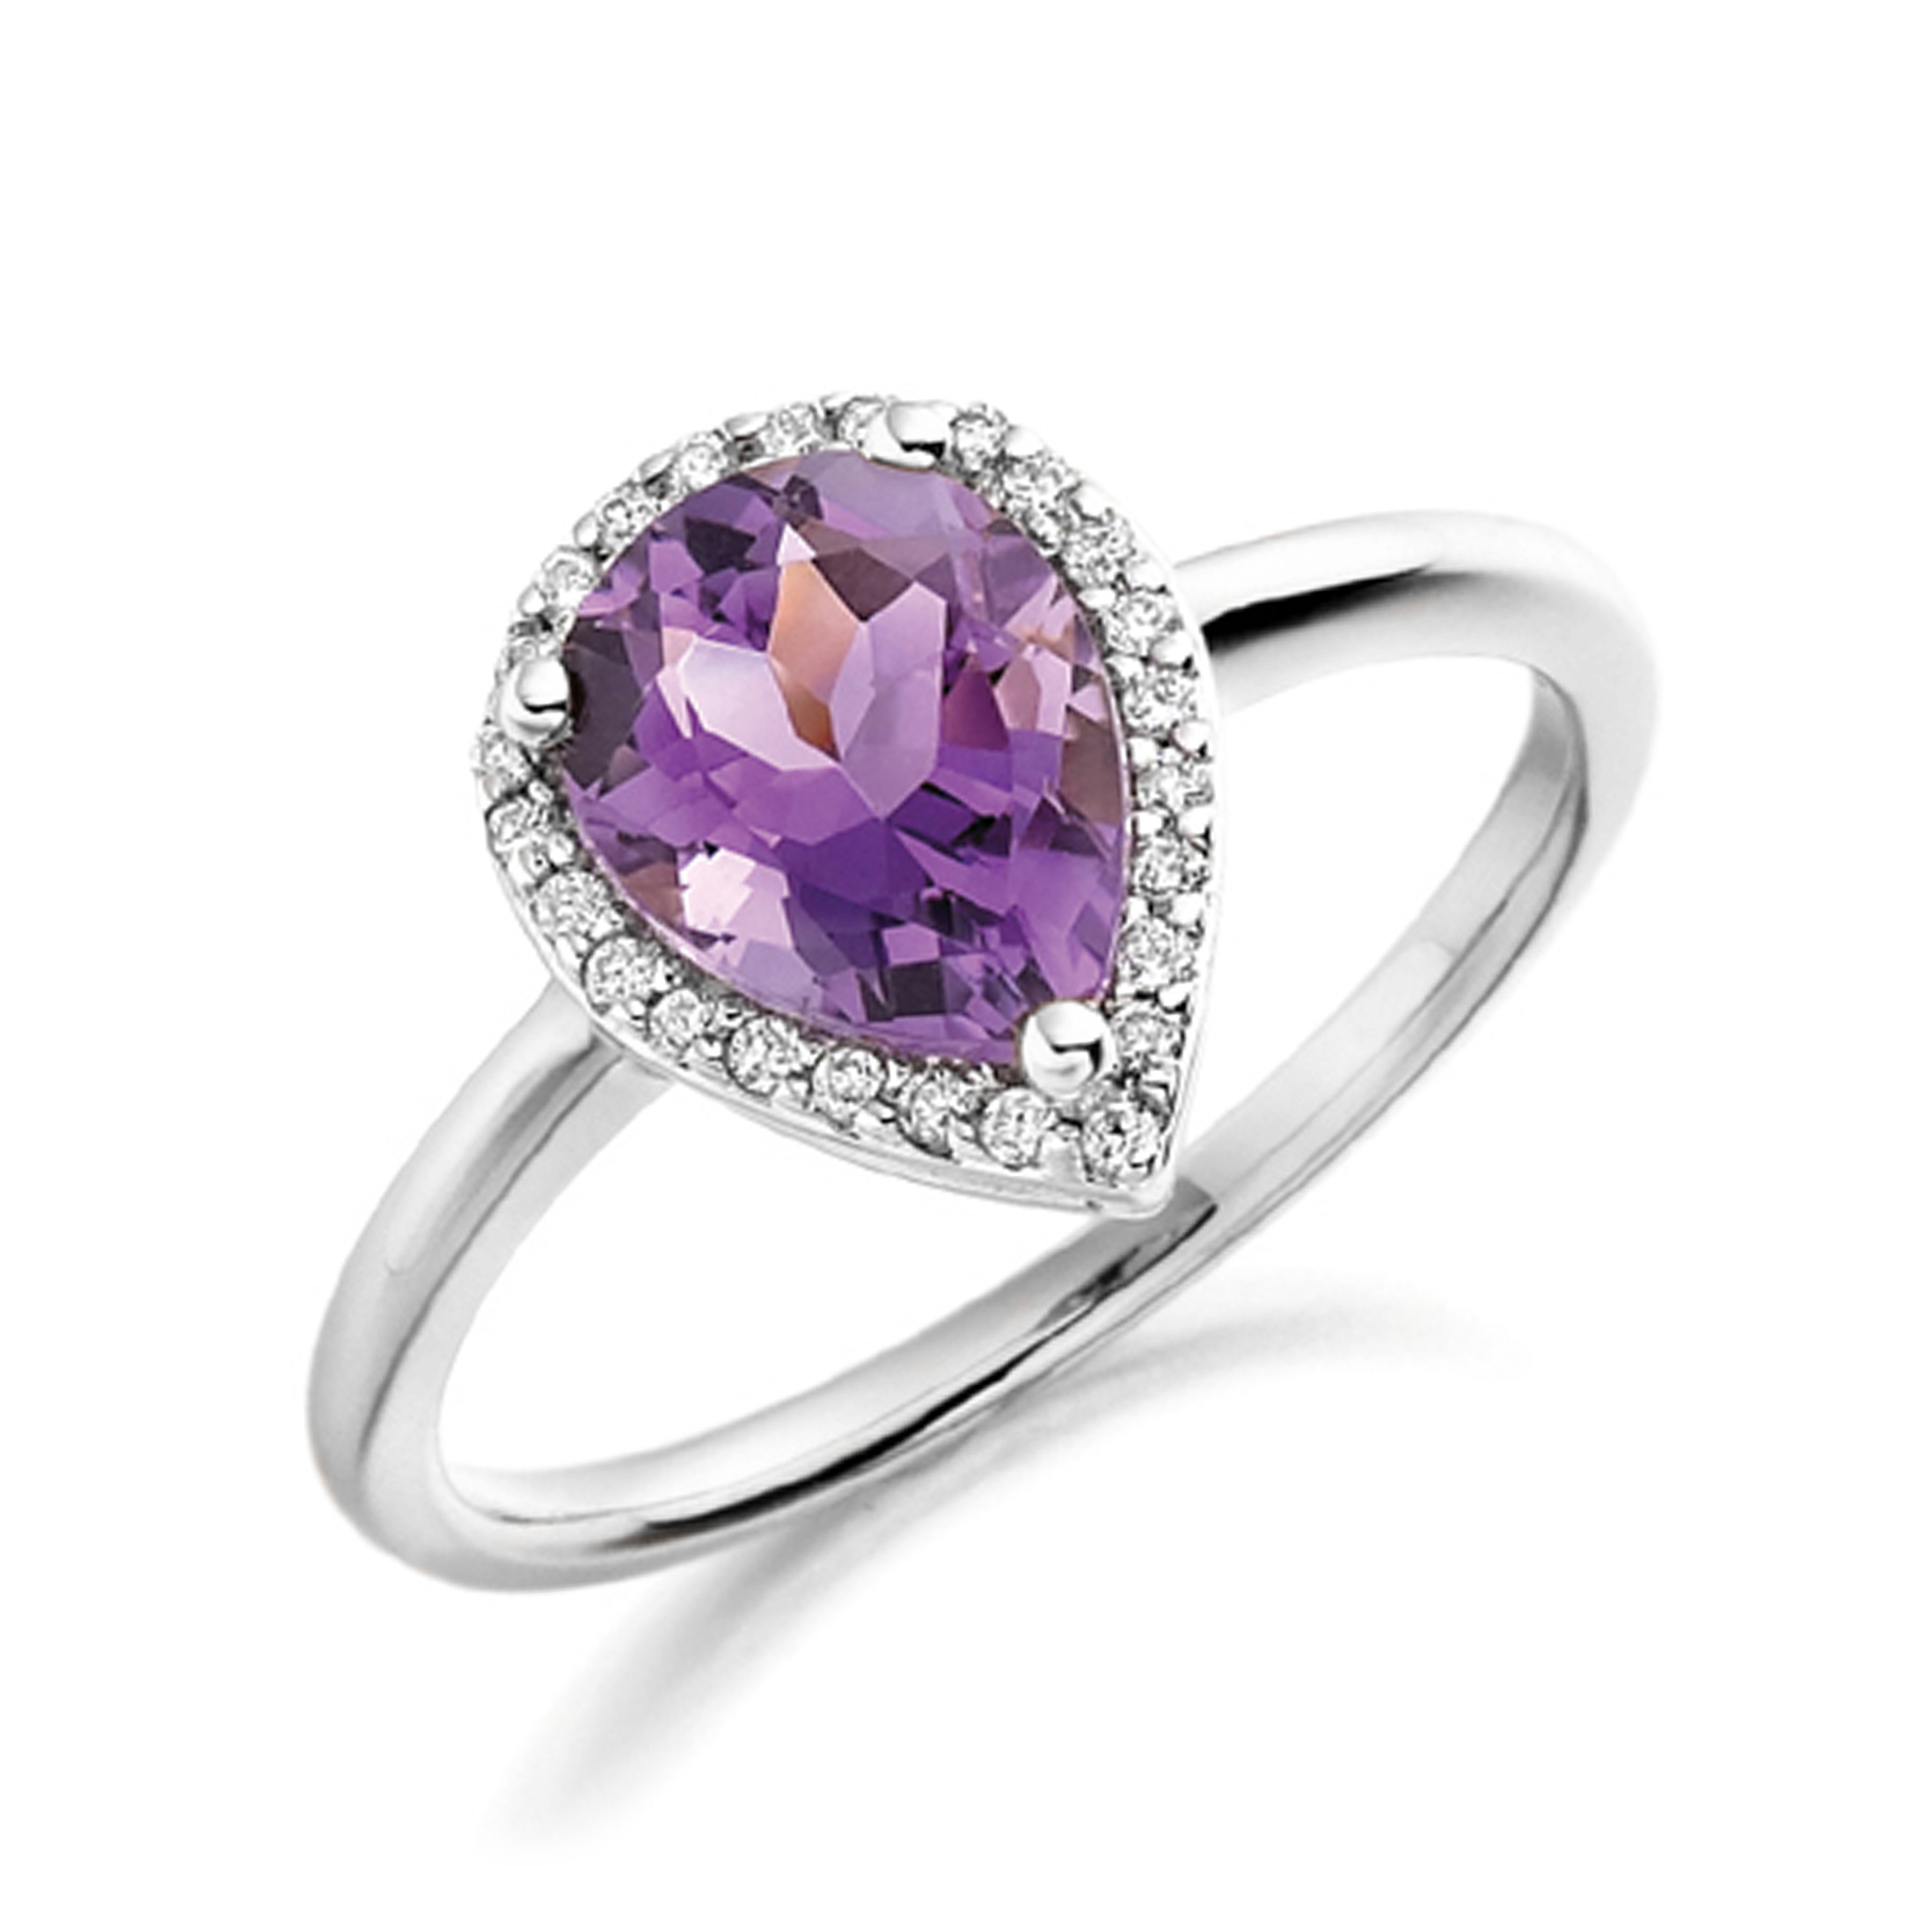 6X4mm Pear Amethyst Stones On Shoulder Diamond And Gemstone Engagement Ring